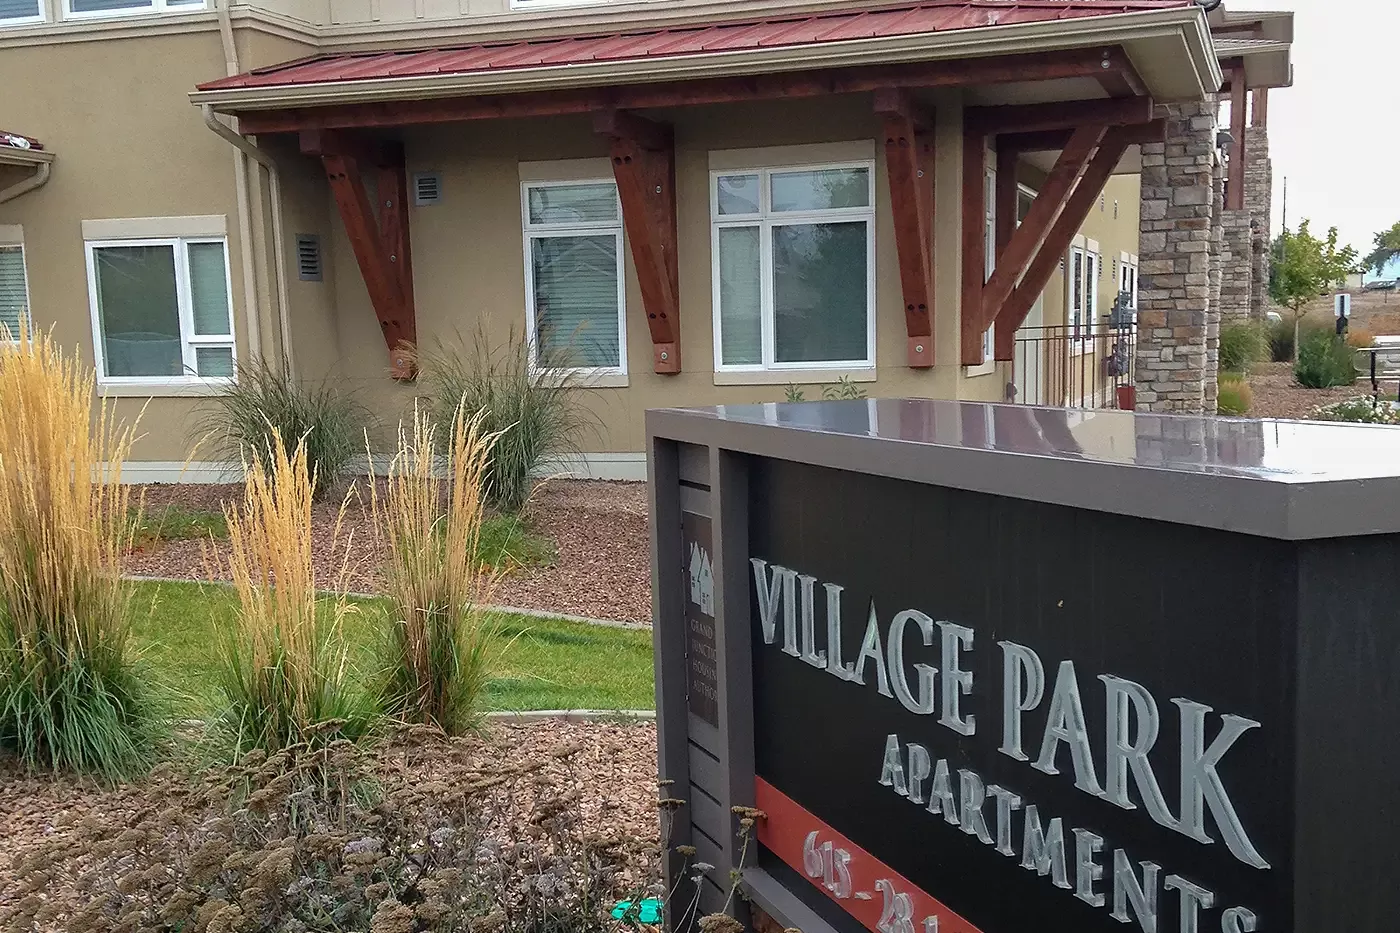 Photo of the Village Park Apartments in Grand Junction, CO